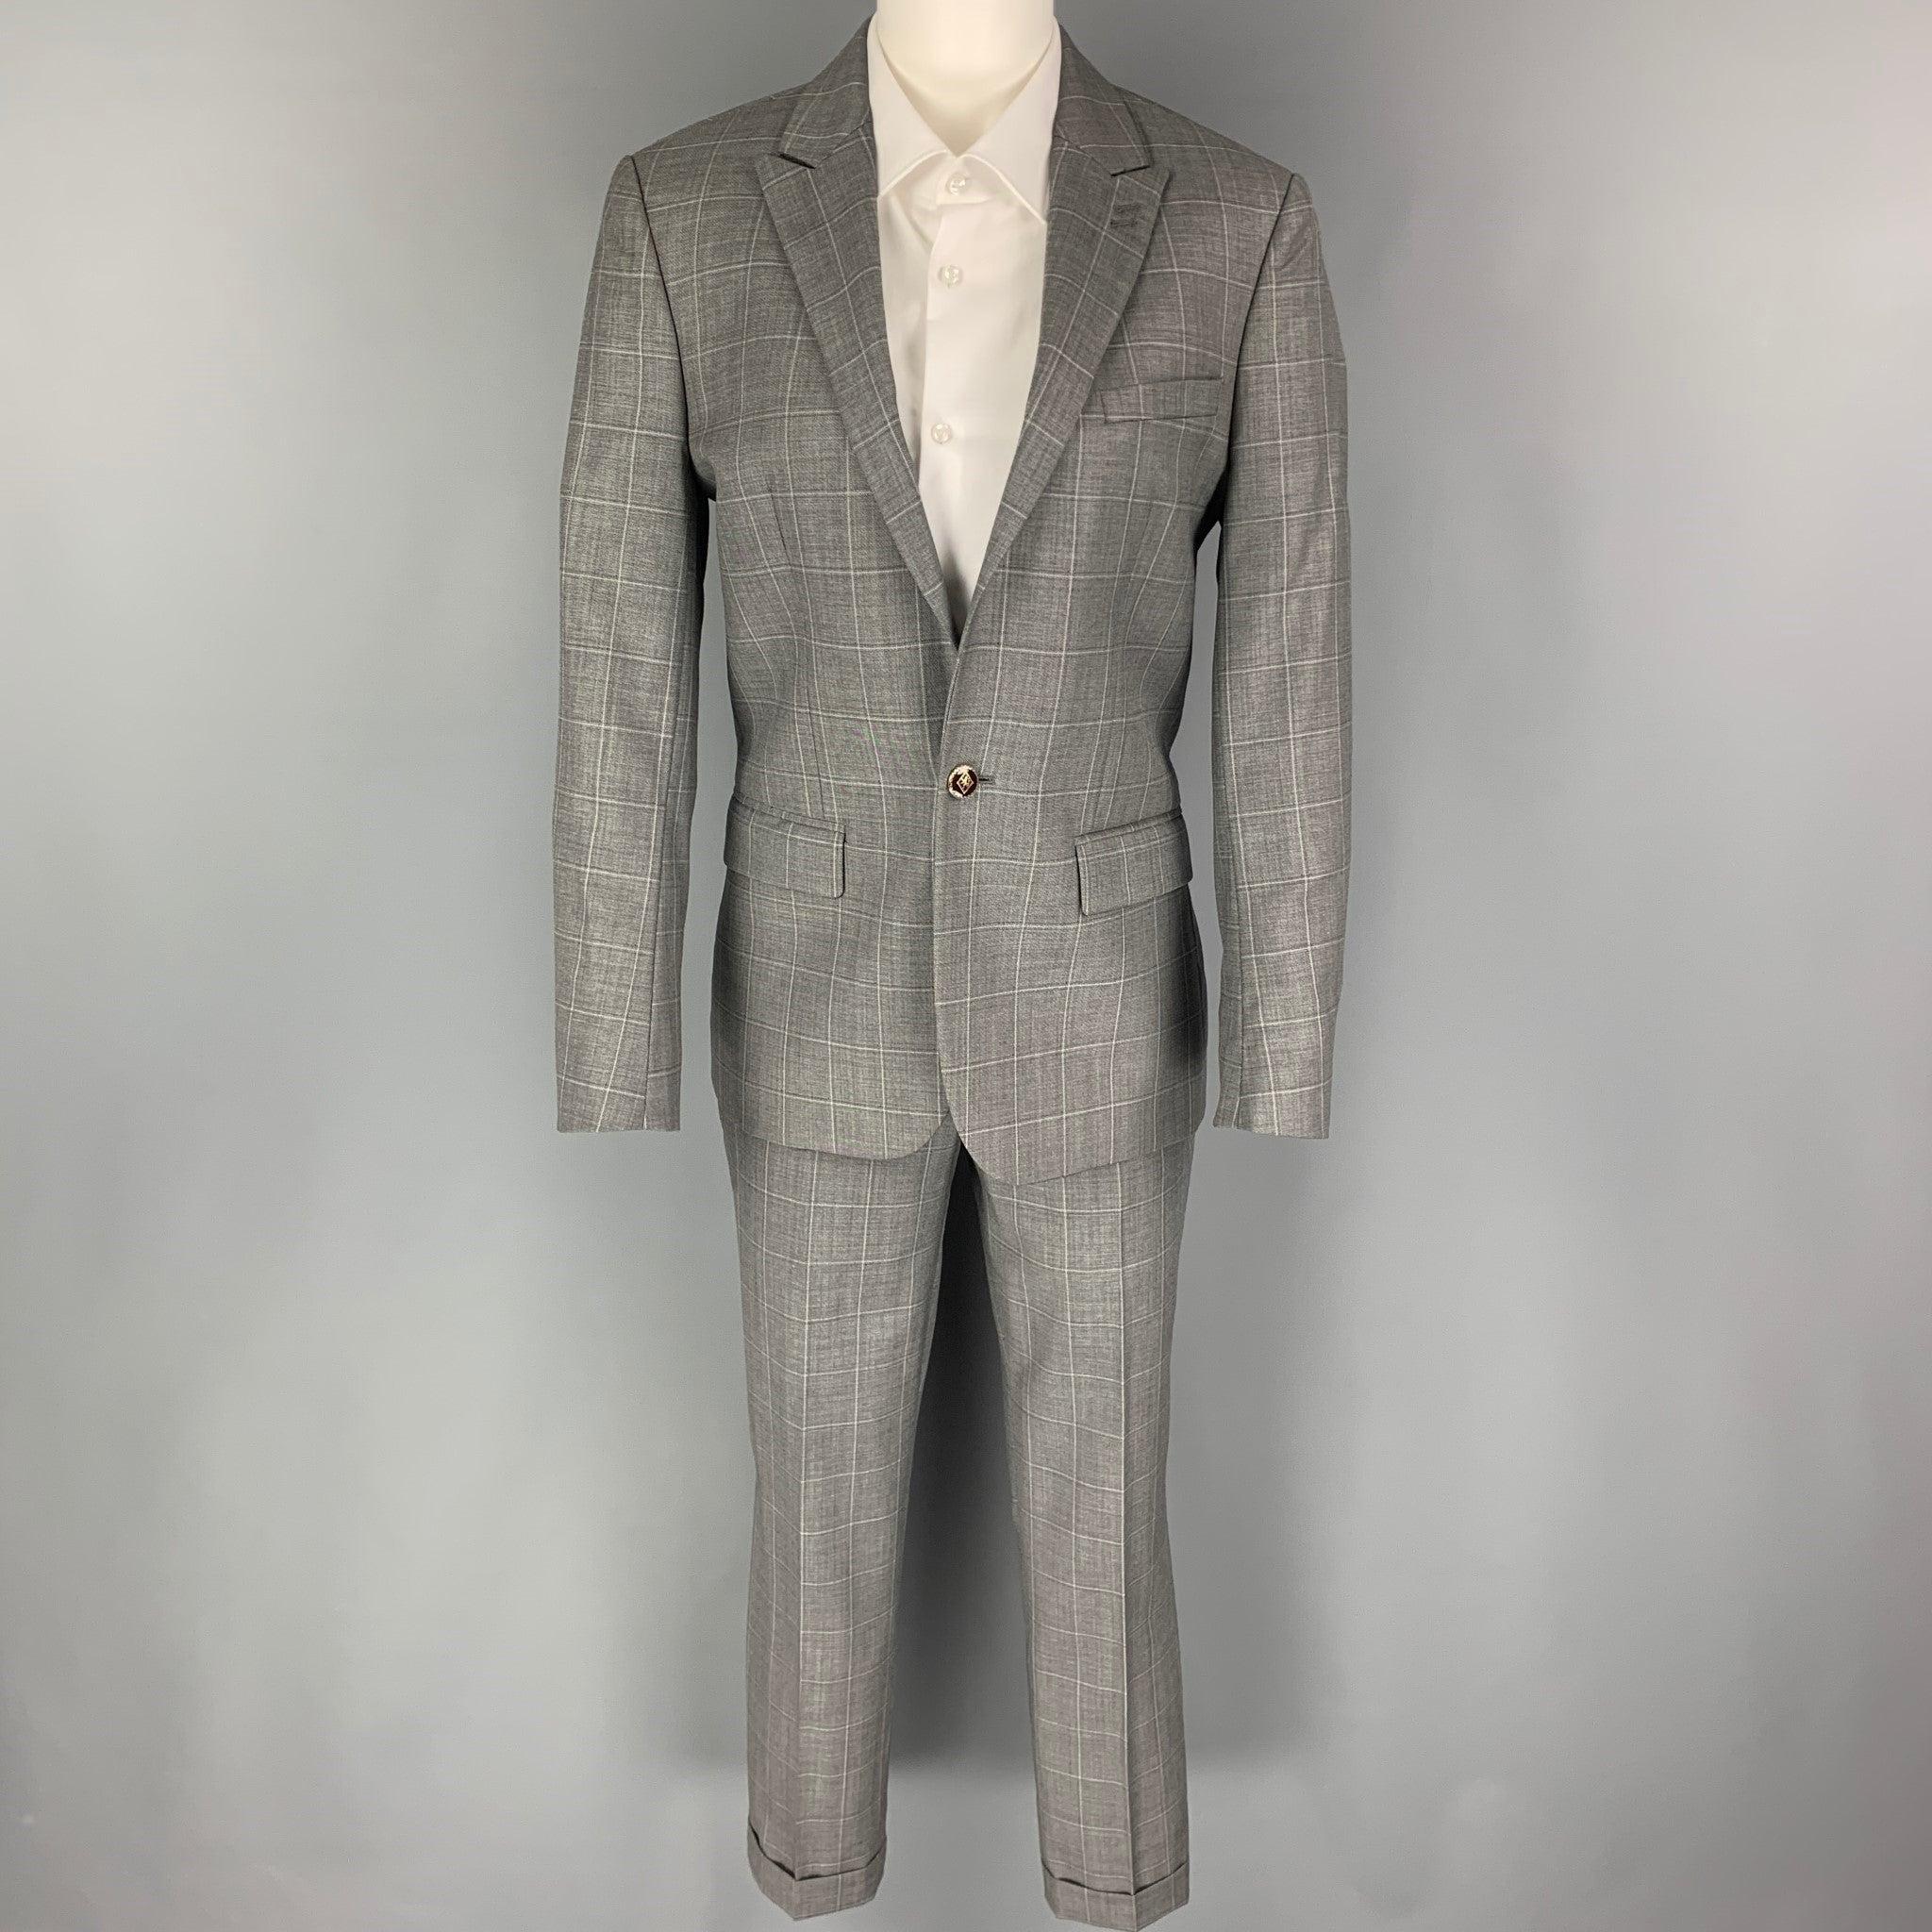 THE KOOPLES
suit comes in a grey window pane wool with a full liner and includes a single breasted, single button sport coat with a peak lapel and matching flat front trousers. Excellent Pre-Owned Condition. 

Marked:   44 

Measurements: 
 